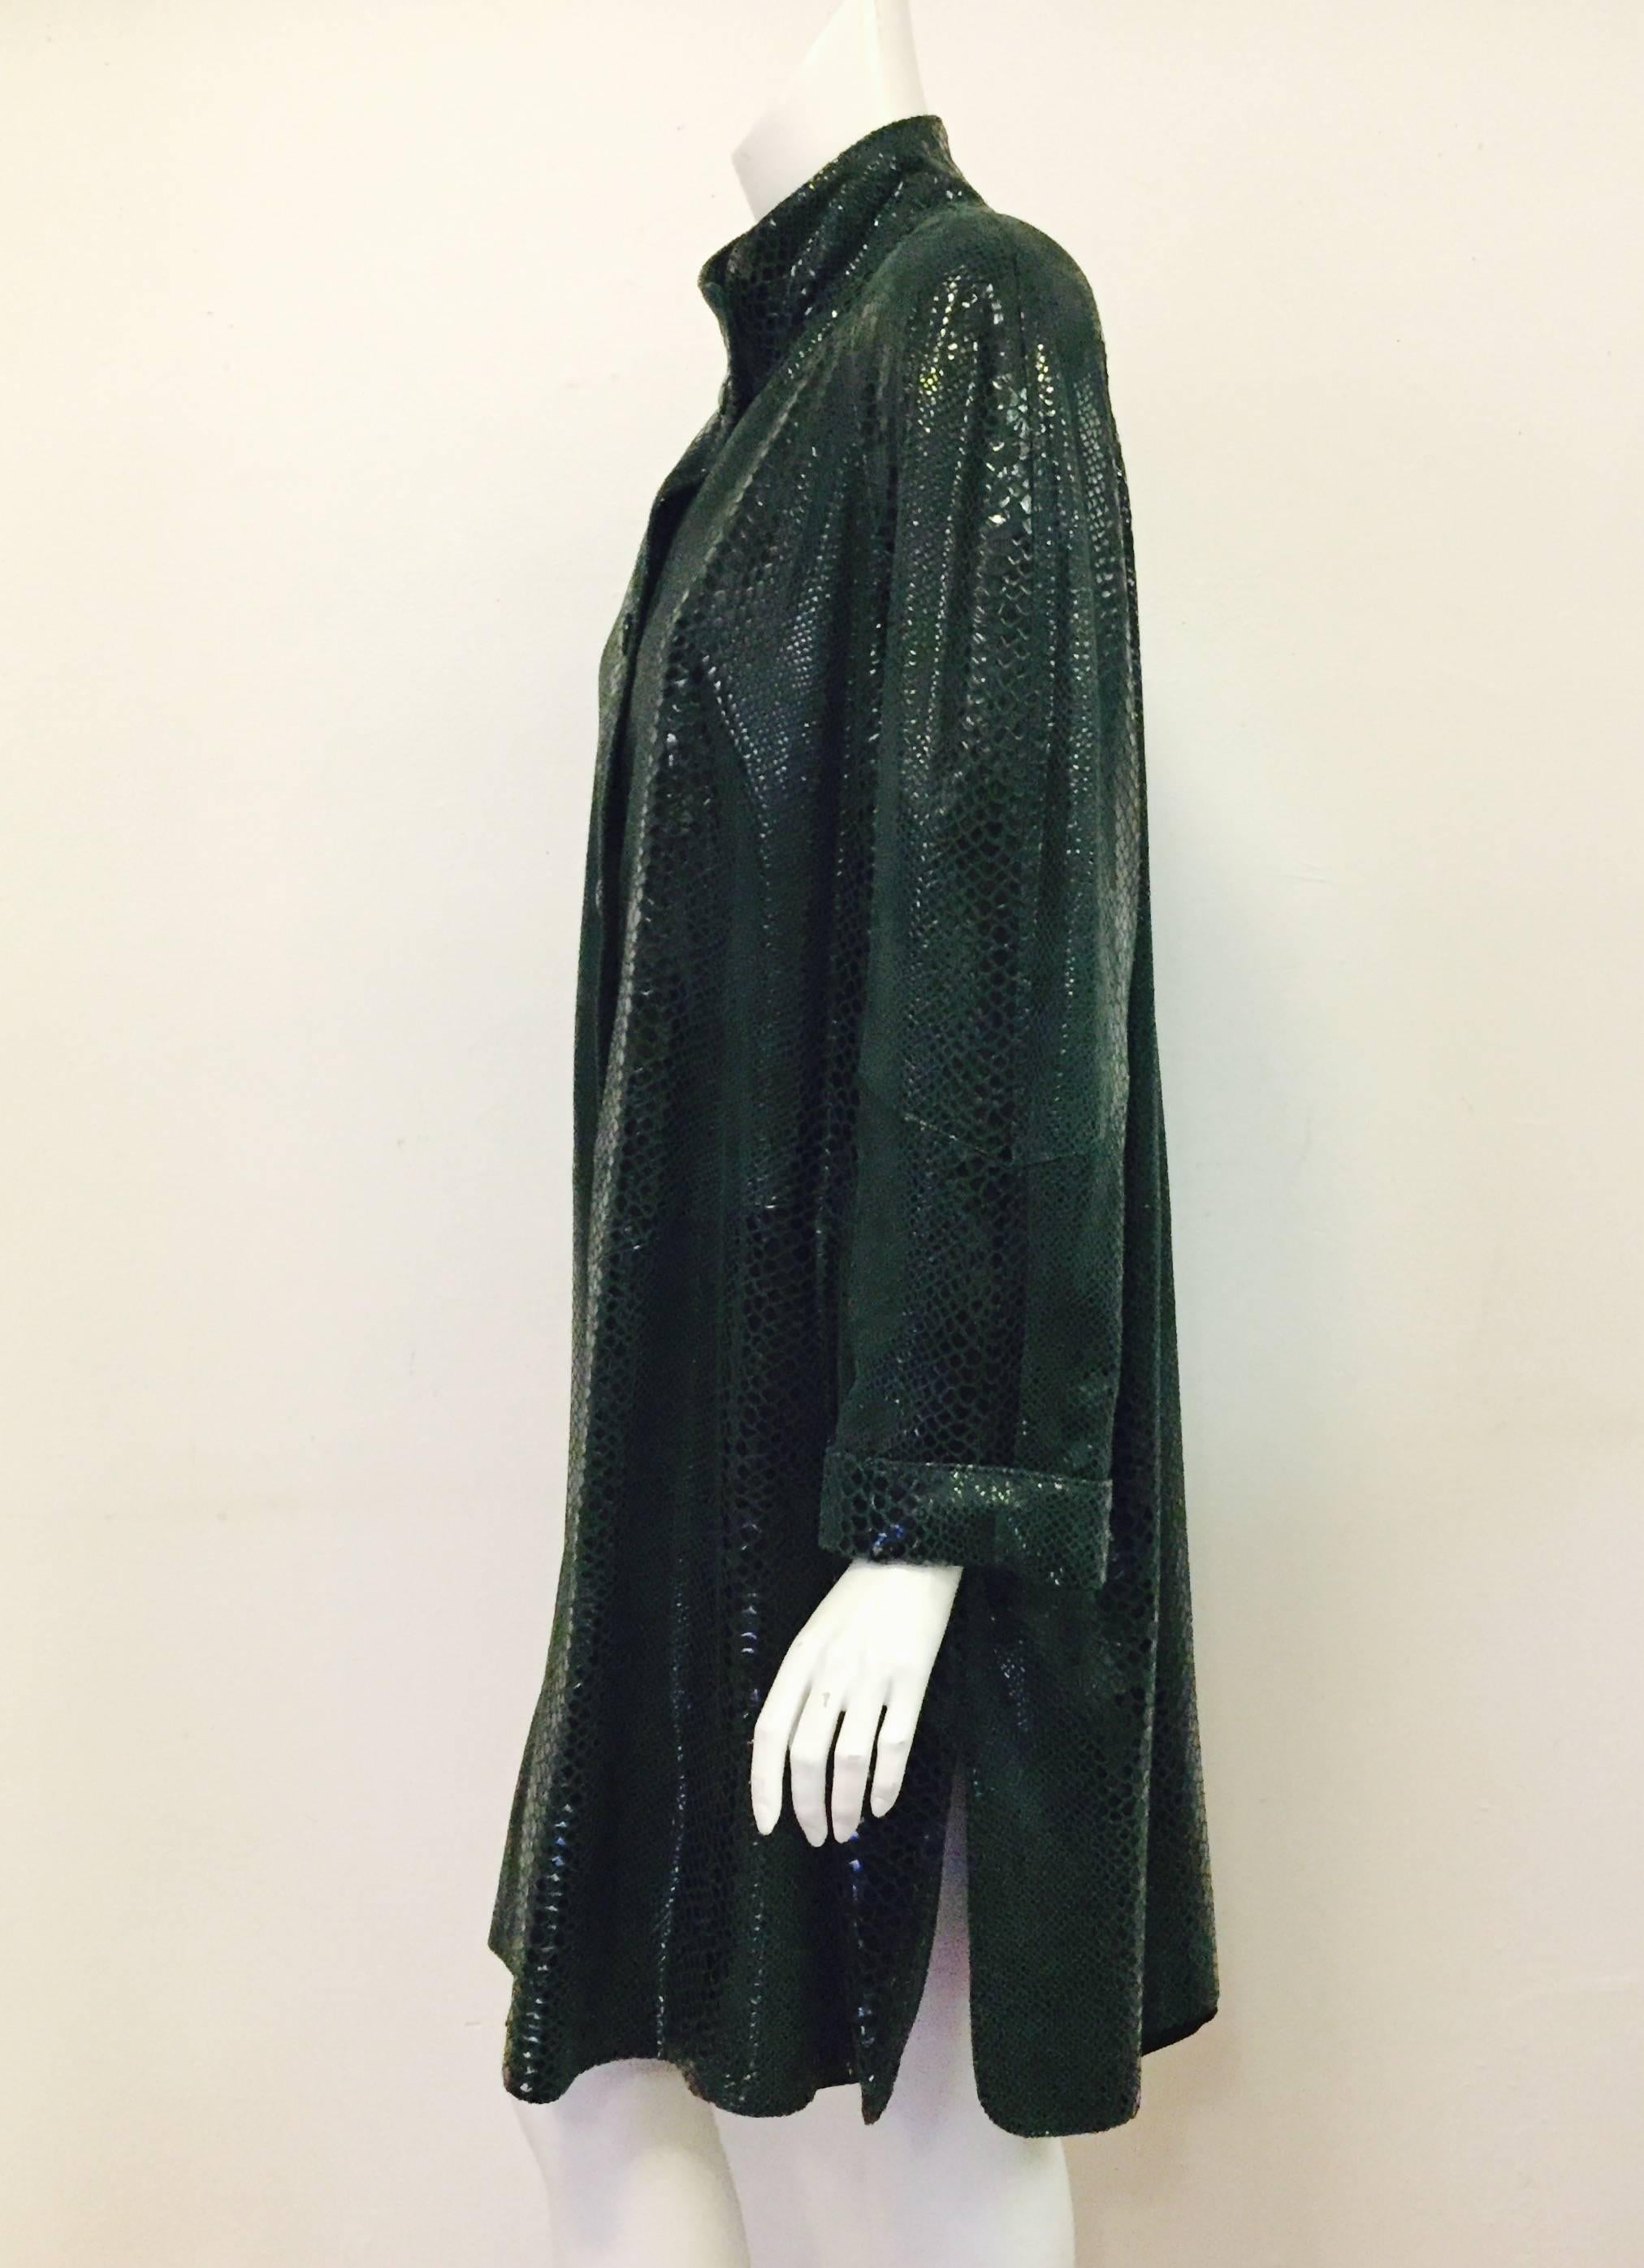 Philippe Vallereuil for years has created and manufactured leather clothing  ( jackets, coats, trousers, skirts, etc.), shearling and fur coats.  This unique green animal stamped leather coat is current and fashionable.  A swing style leather coat